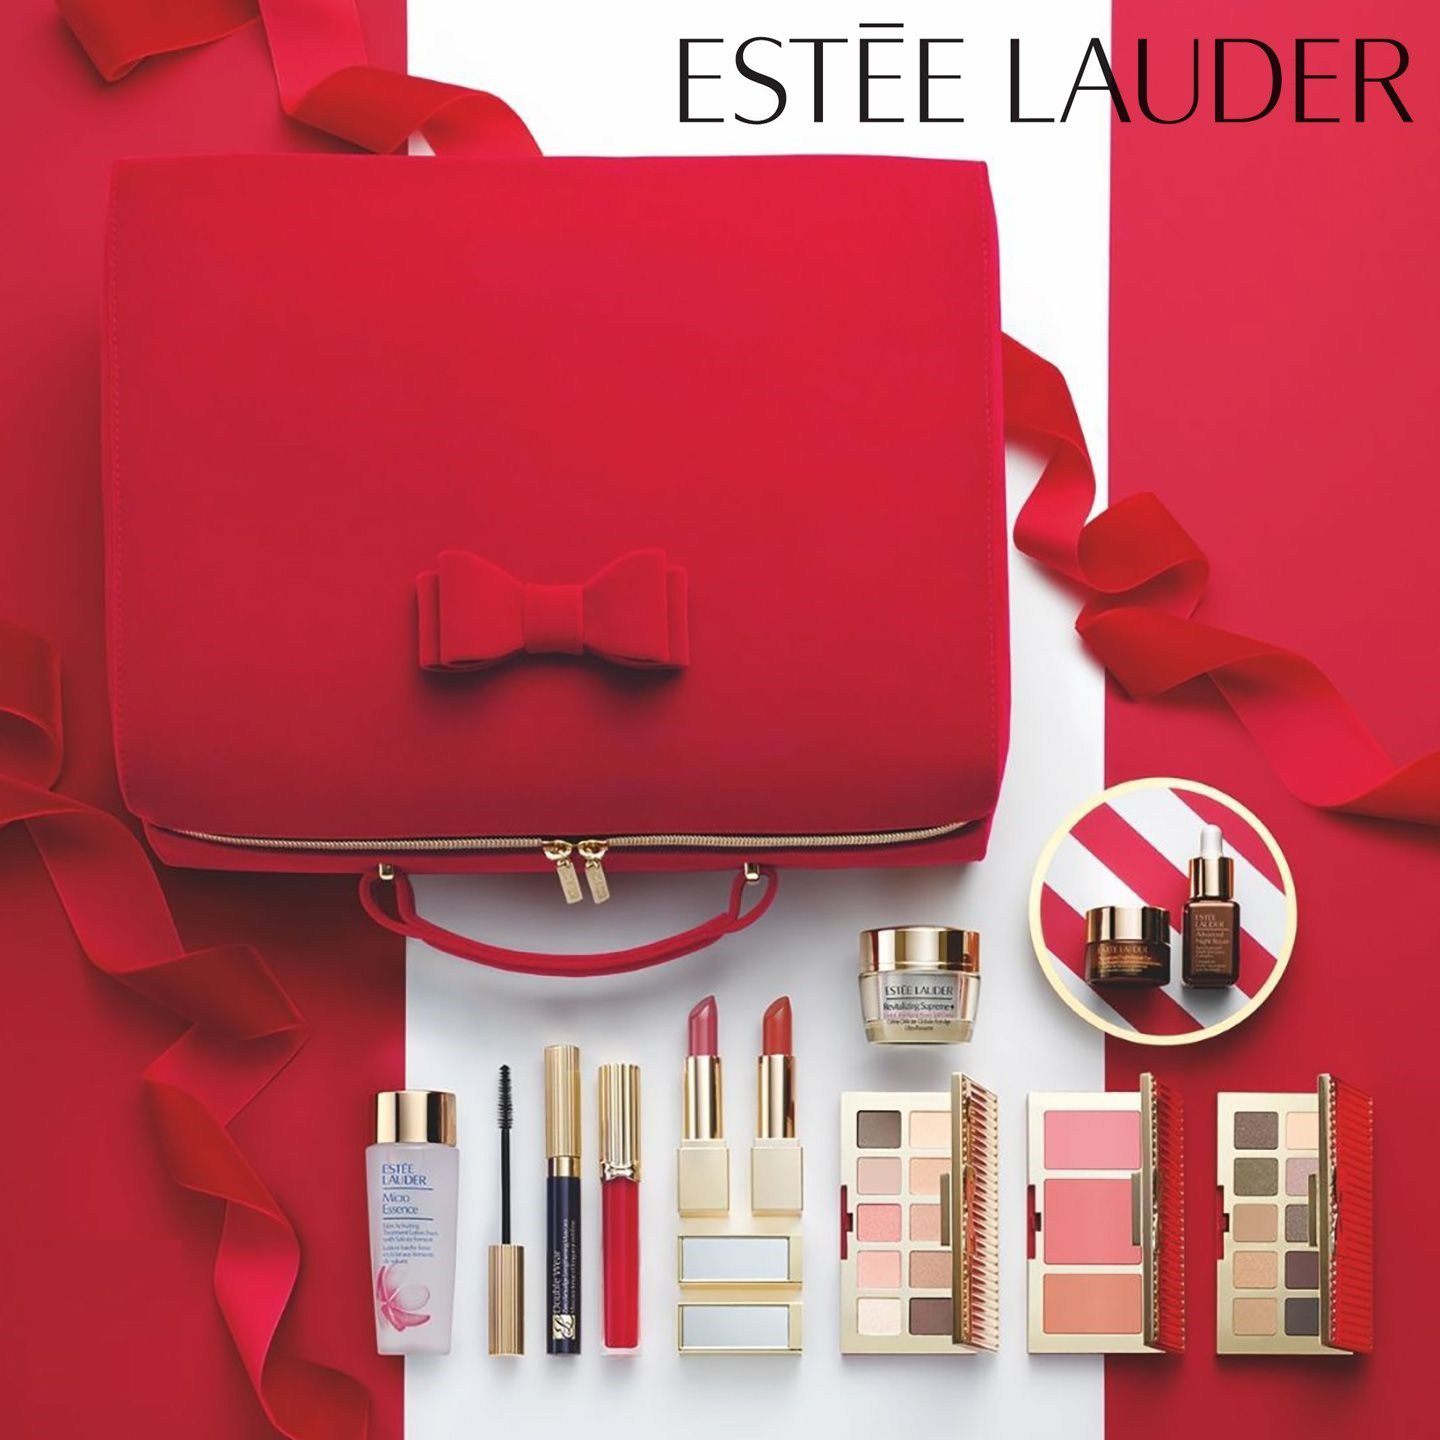 Estee Lauder Holiday Blockbuster 2020 USA Gift Set 14 pcs.  ประกอบไปด้วย   -New Advanced Night Repair 30ml  -Pure Color Envy Eye Shadow Palettes in NUDES (10 shades) and GLAM (10 shades)—20 essential shades in all (total net wt. for each palette 3.7g)  -Pure Color Envy Cheek Palette in GLOW, with 3 essential shades: Bronze Goddess Shade Medium, 220 Pink Kiss and Modern Mercury (total wt. 8.7g)  -Sumptuous Extreme Mascara, 8ml  -Pure Color Envy Lipsticks, 3.5 g each, in 184 Knockout Nude and 333 Persuasive  -Pure Color Envy Lip Gloss, 2.7ml, in 115 Flash Fire  -Advanced Night Repair Eye Supercharged Complex 5ml  -Revitalizing Supreme+ Creme, 7ml  -Gentle Eye Makeup Remover, 100ml  -Train Case